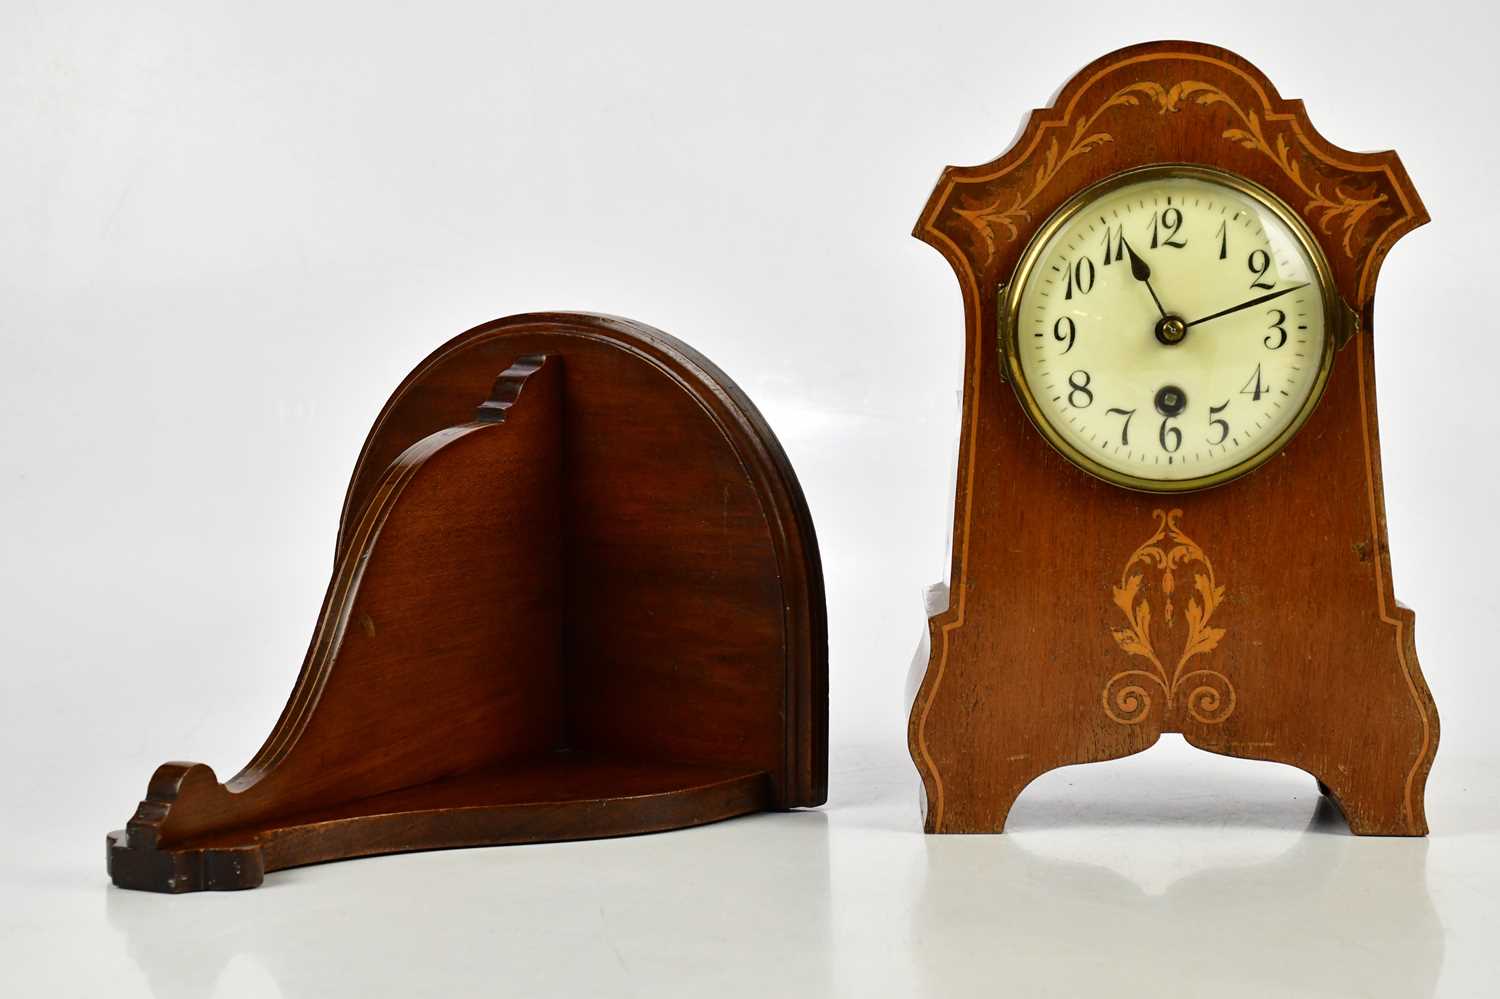 An Edwardian inlaid mahogany mantel clock with dial set with Arabic numerals, height 26cm, and a